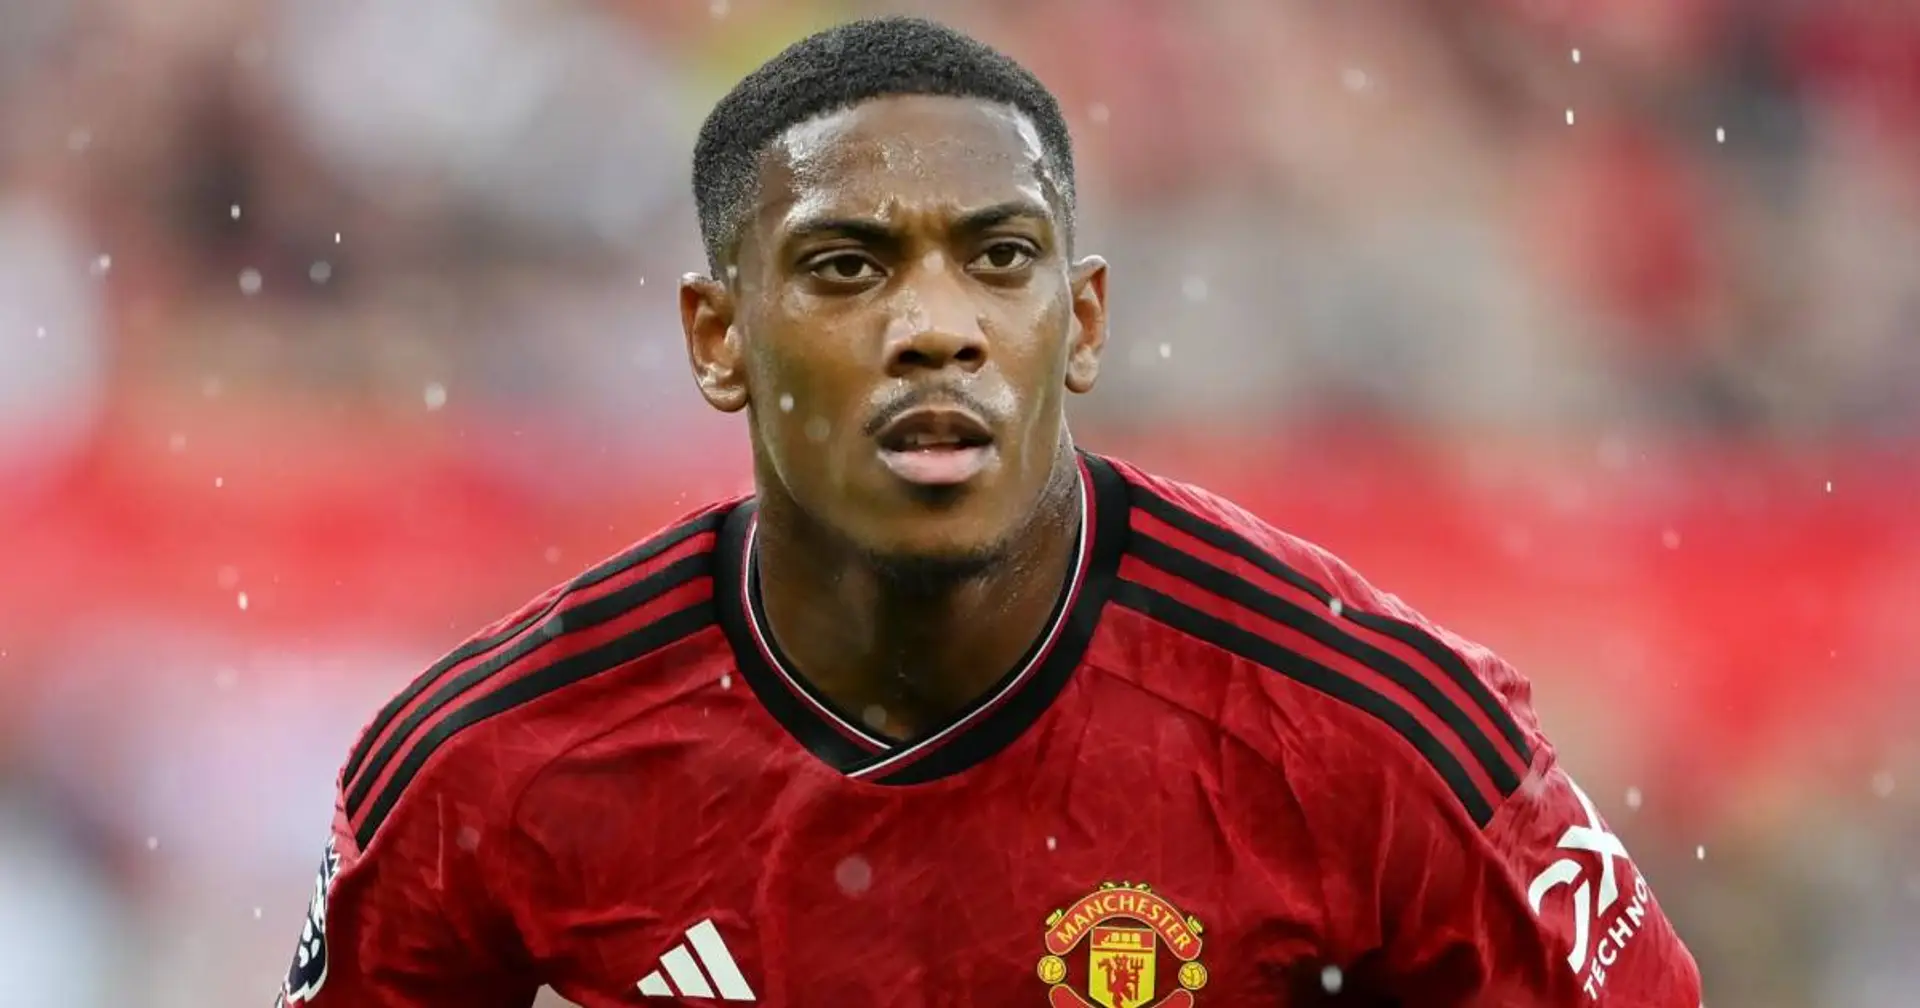 Anthony Martial to leave Man United this summer (reliability: 5 stars)